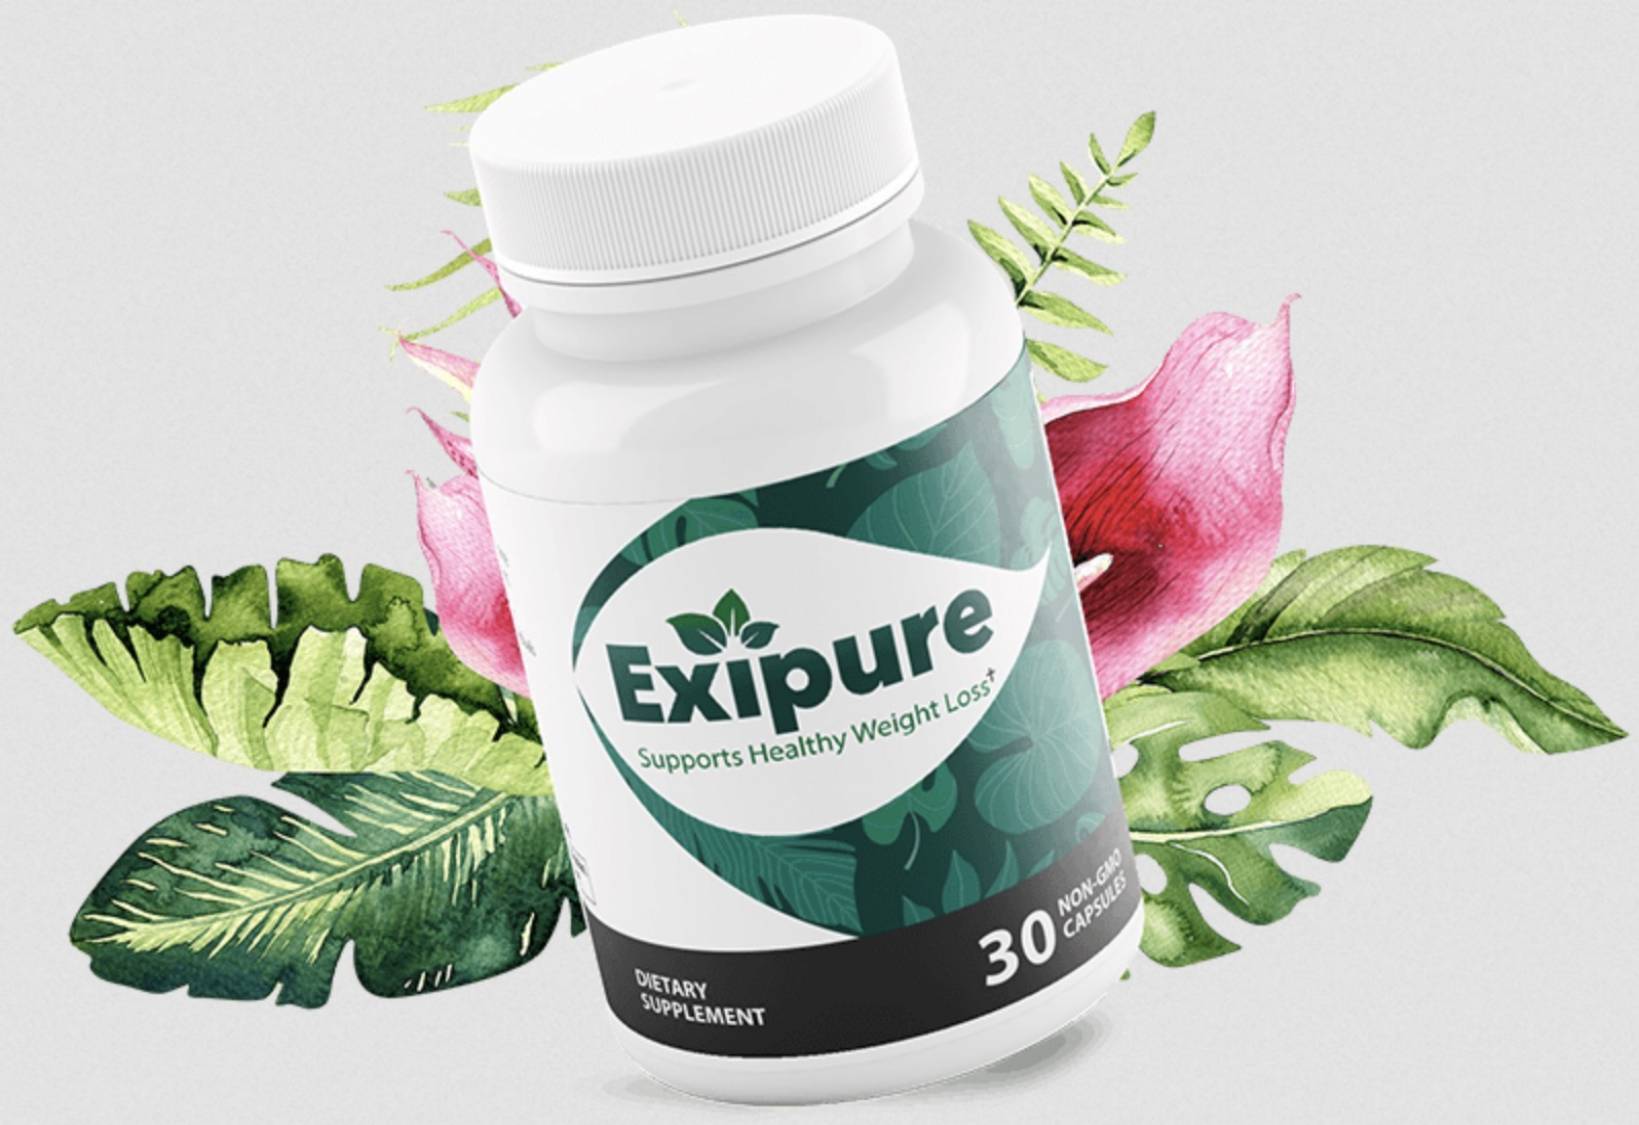 Is Exipure A Good Product